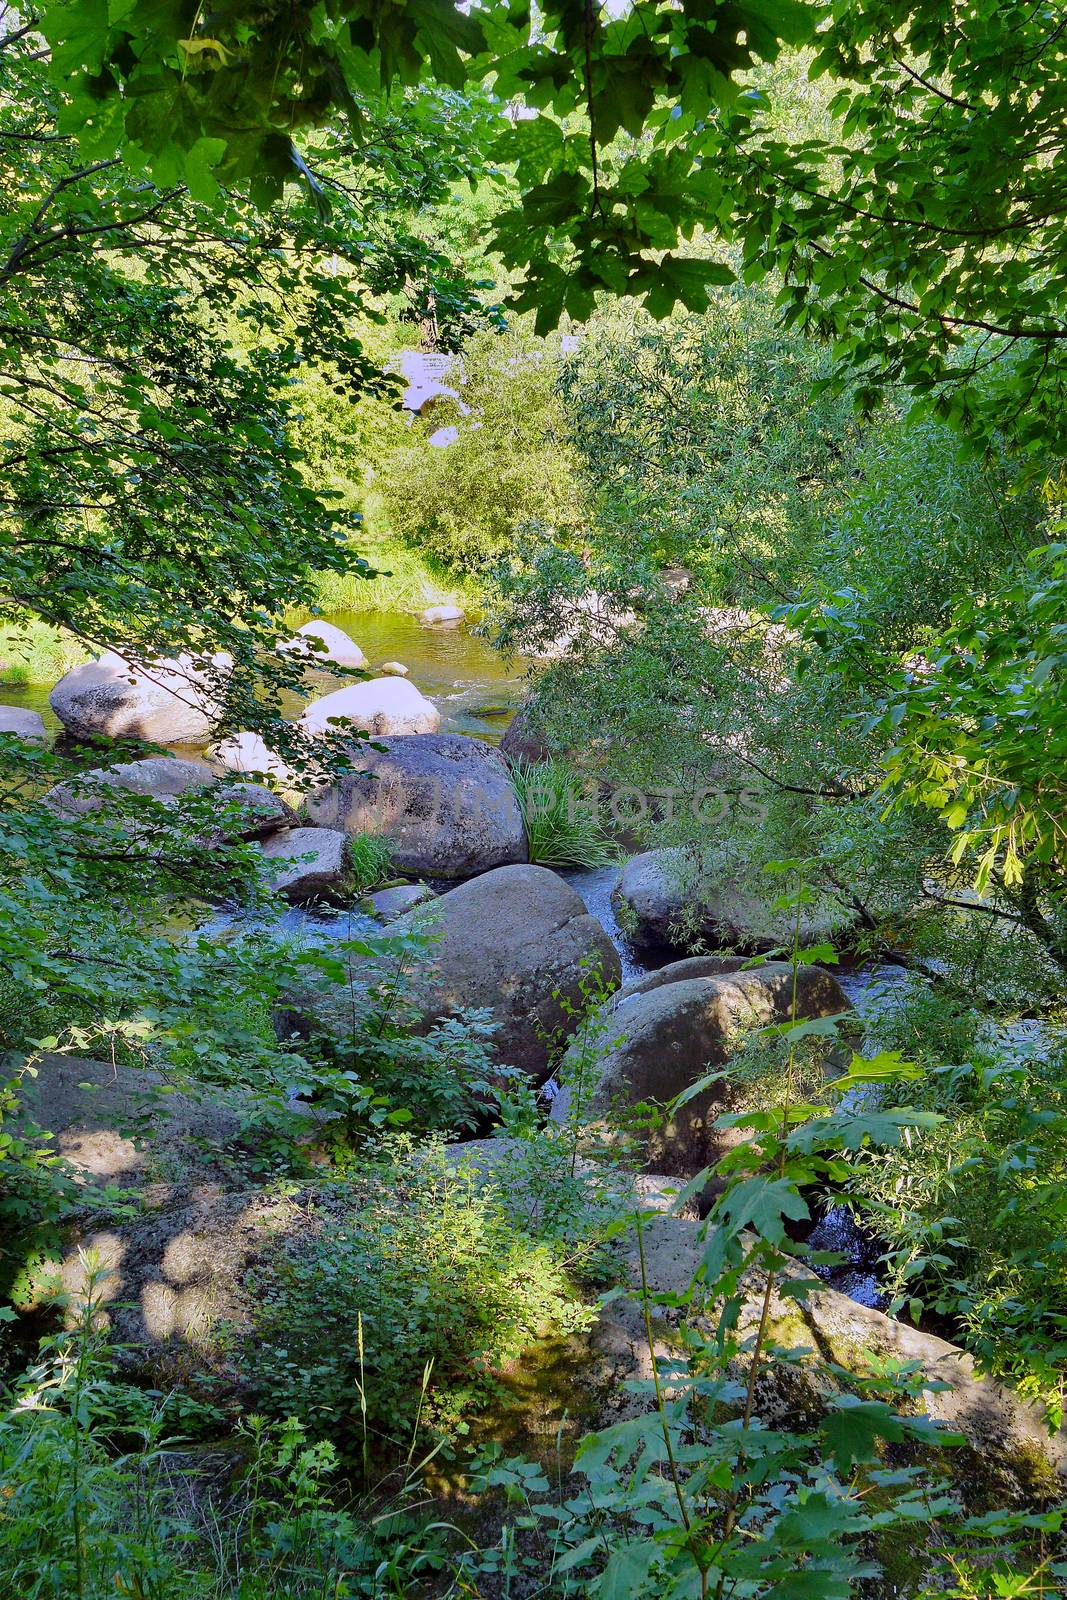 The wide rocky river is surrounded by wide lush bushes and trees